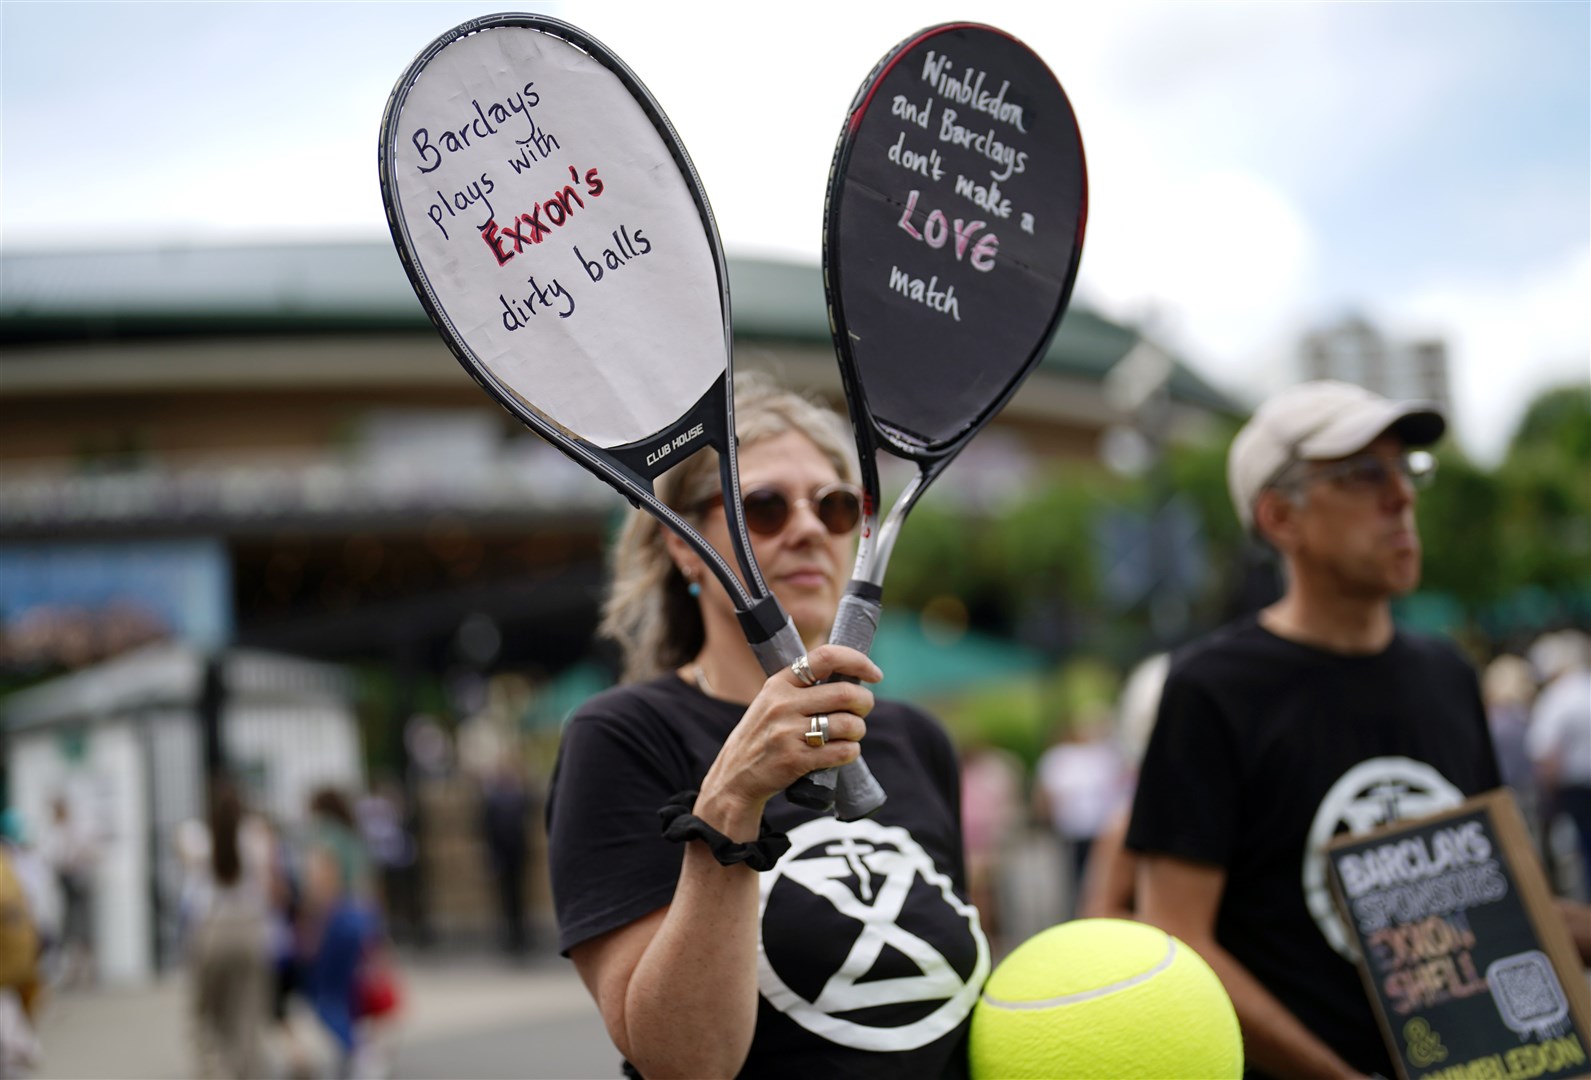 Rachie Ross holding up signs outside of the Wimbledon gates (Victoria Jones/PA)